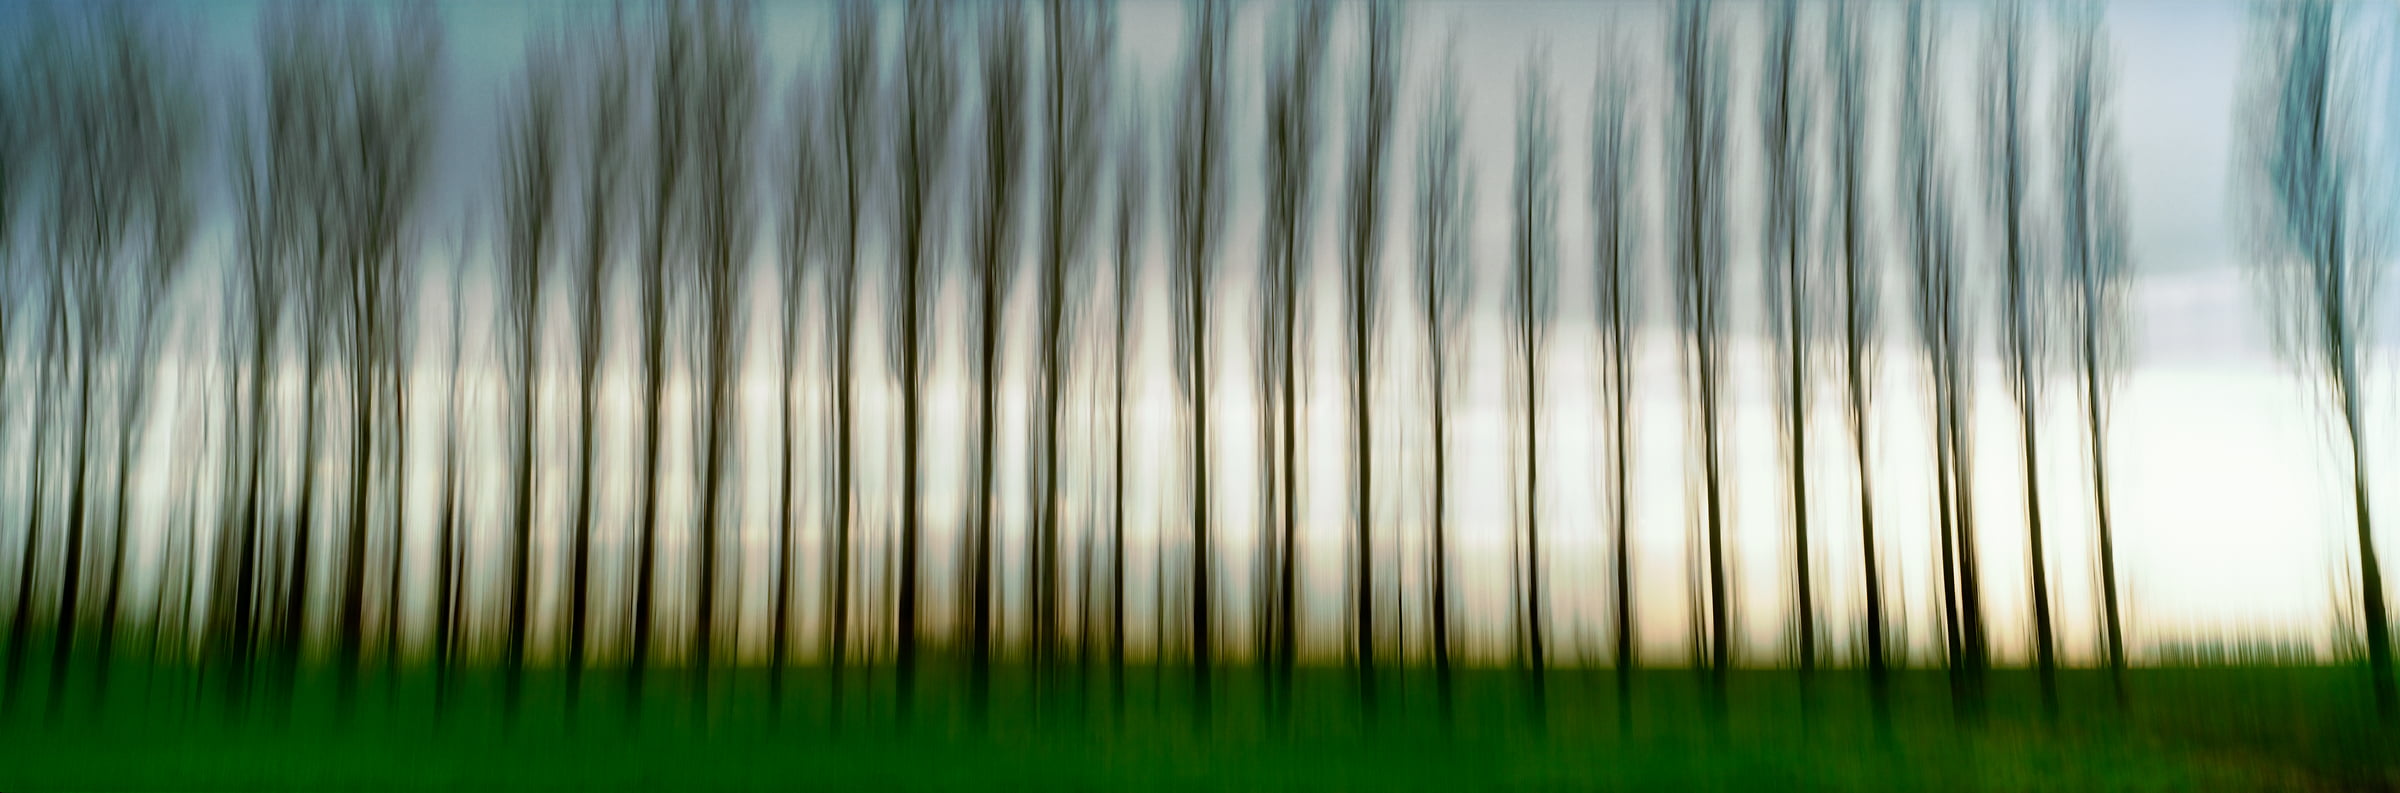 333 megapixels! A very high resolution, large-format, fine art photo print of trees; abstract photograph created by Scott Dimond in Wheatland County, Alberta, Canada.